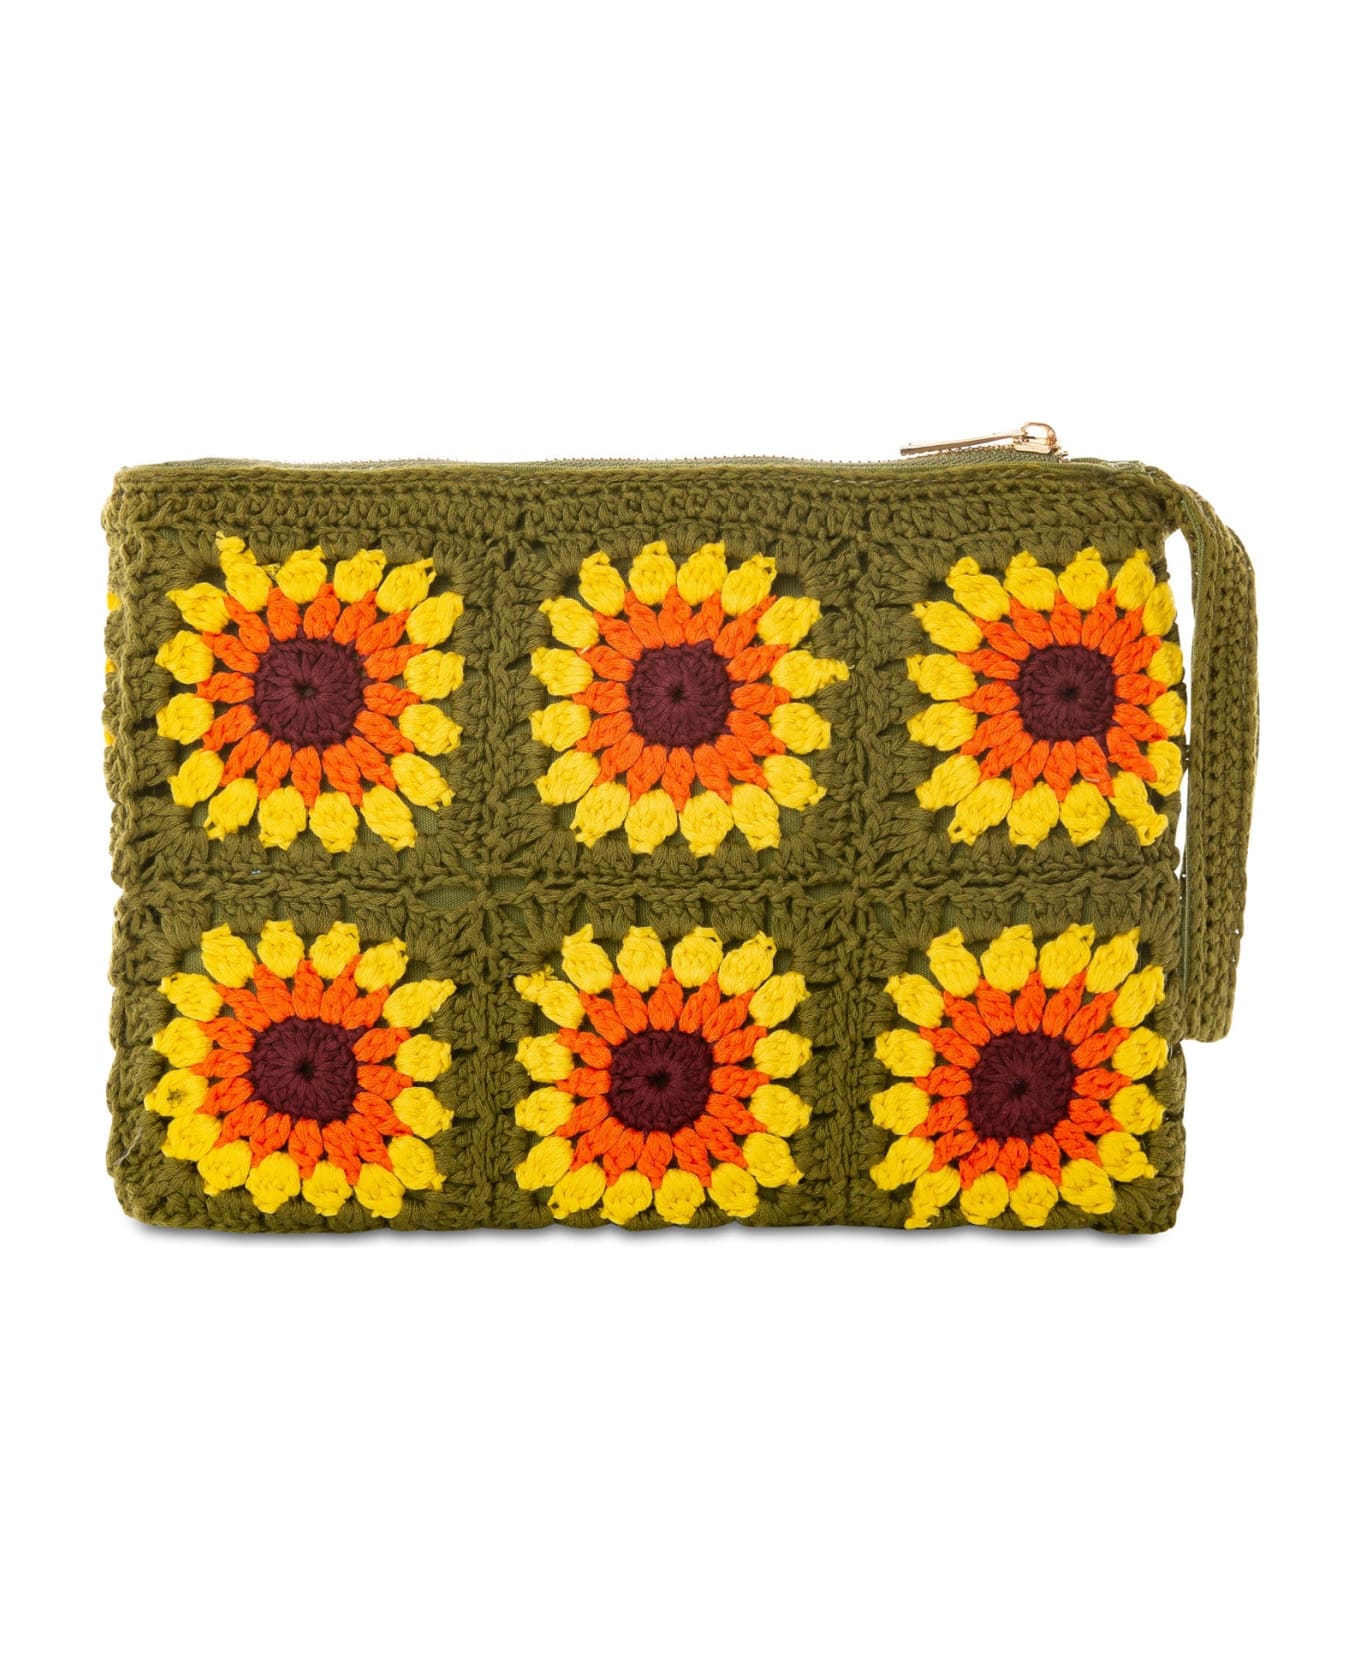 MC2 Saint Barth Parisienne Crochet Pouch Bag With Sunflower Embroidery - GREEN